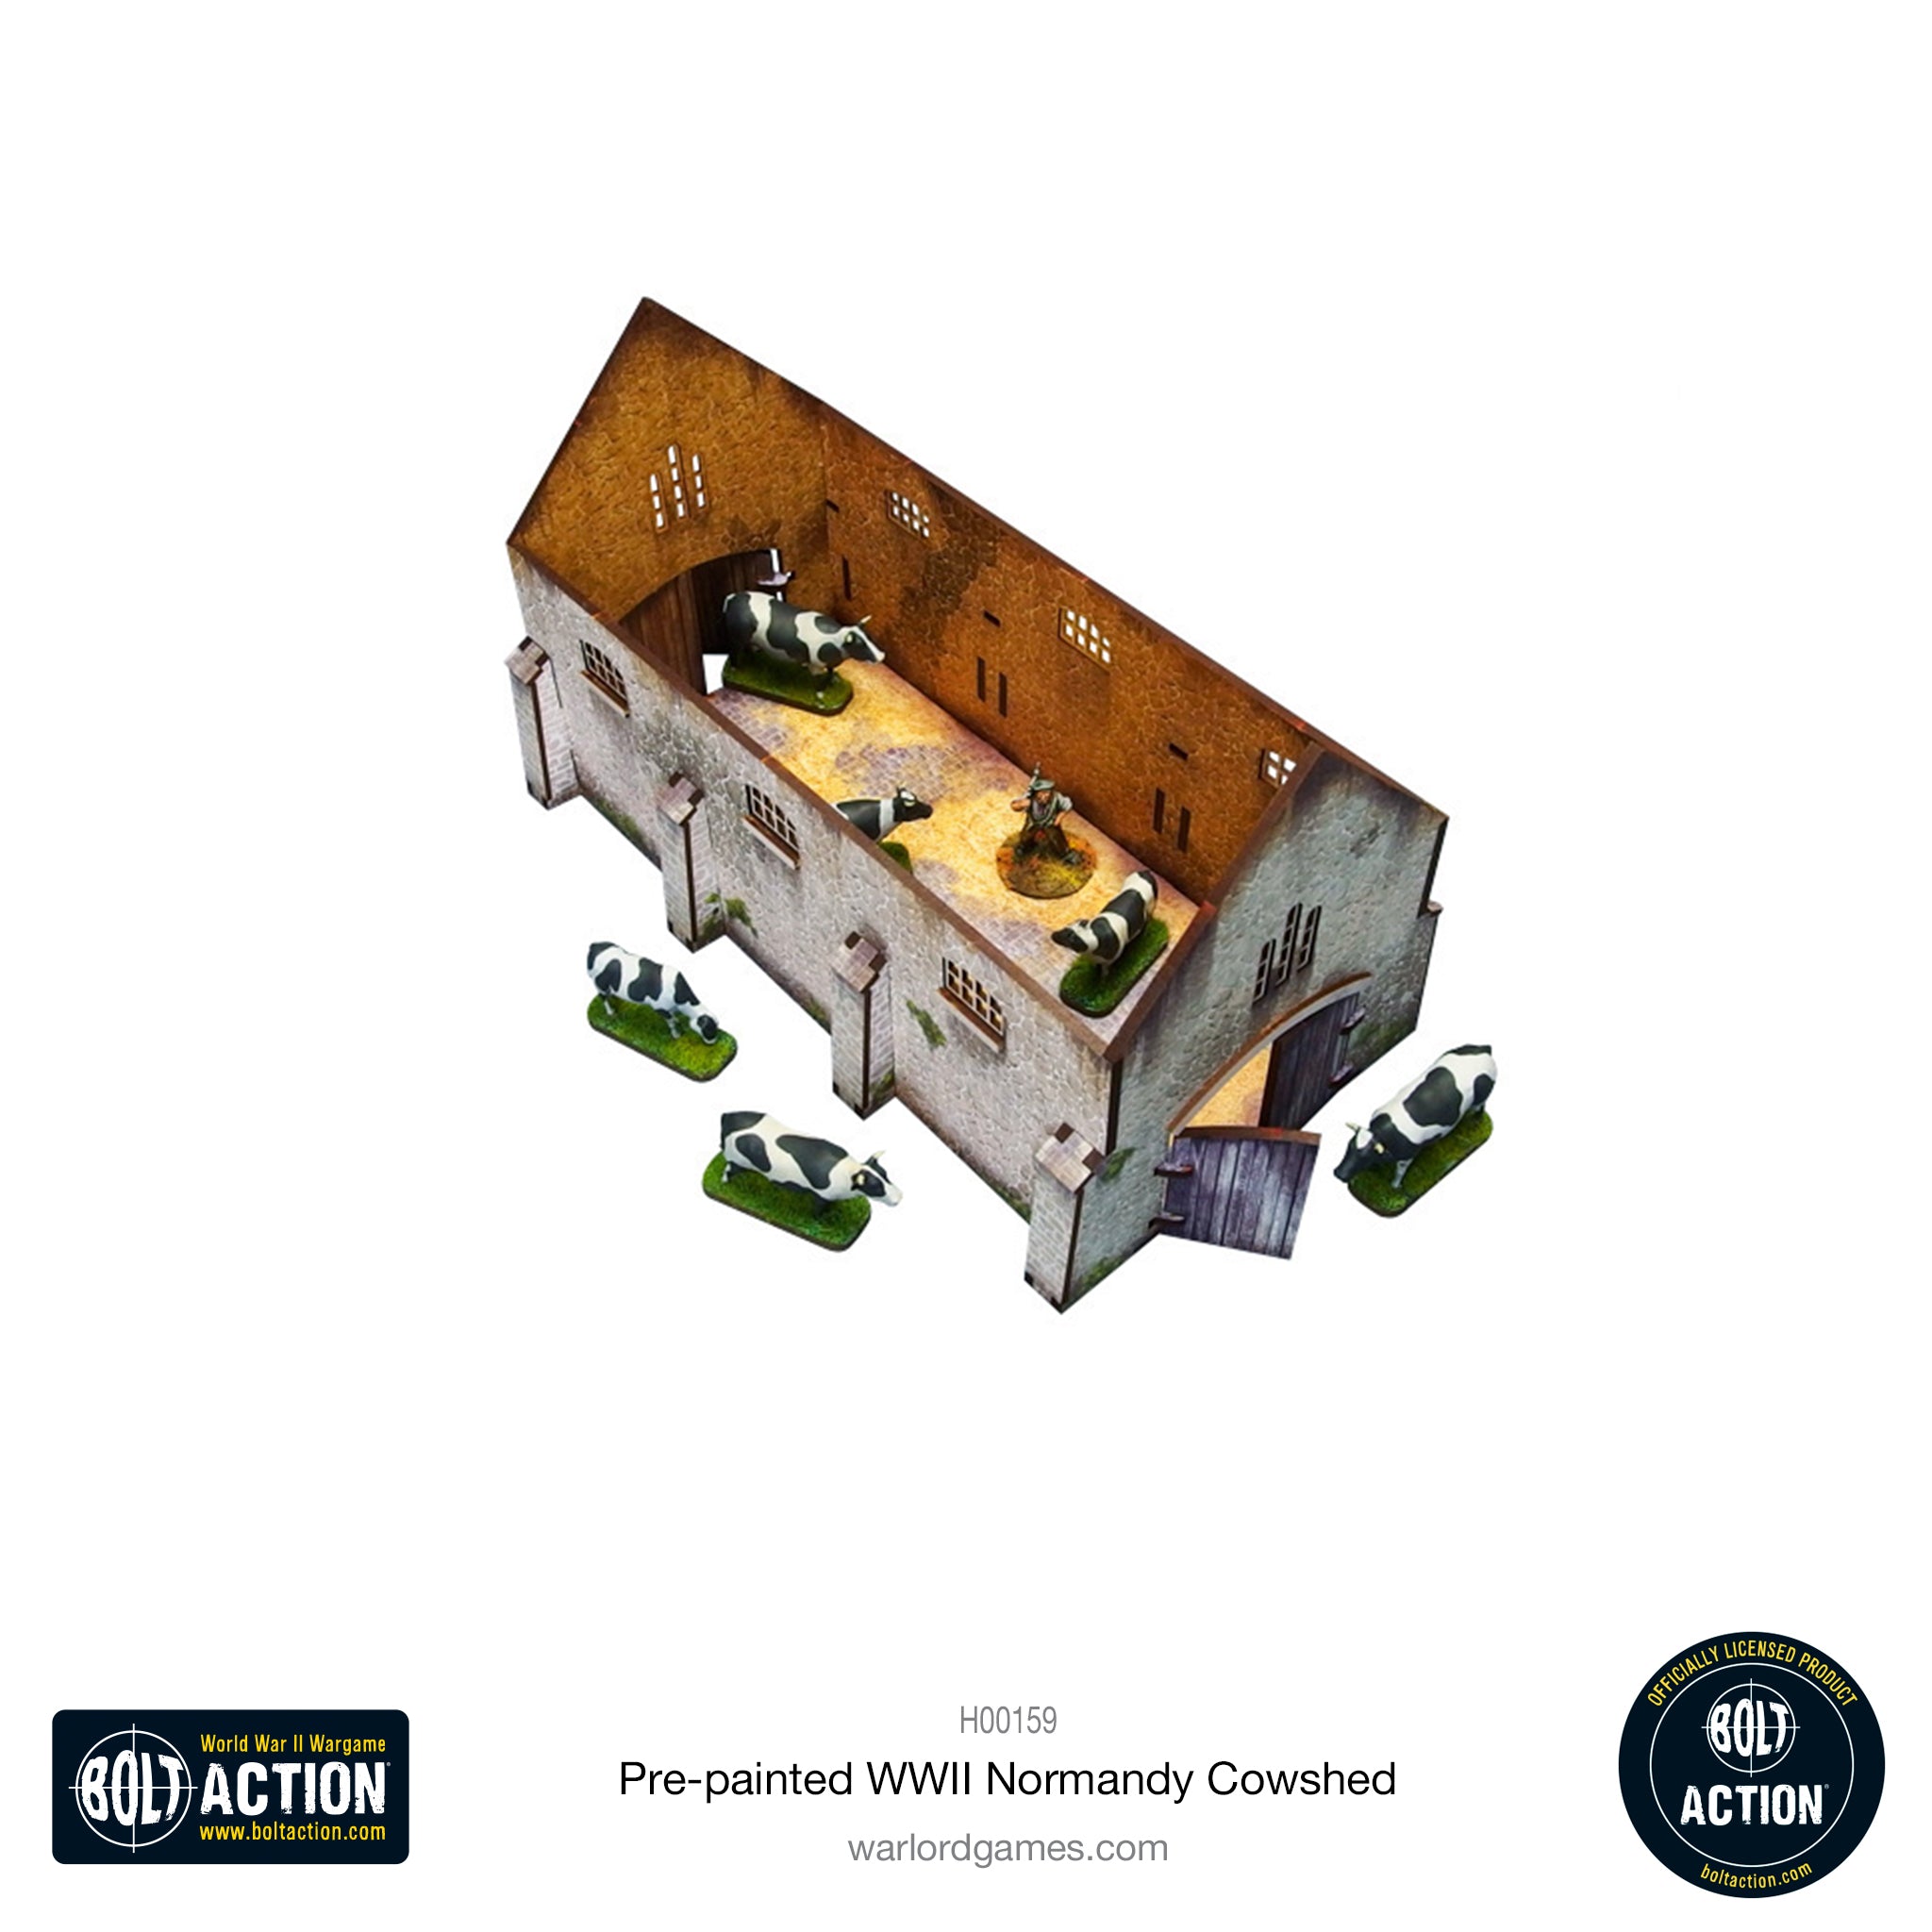 Bolt Action: Pre-painted WWII Normandy Cowshed